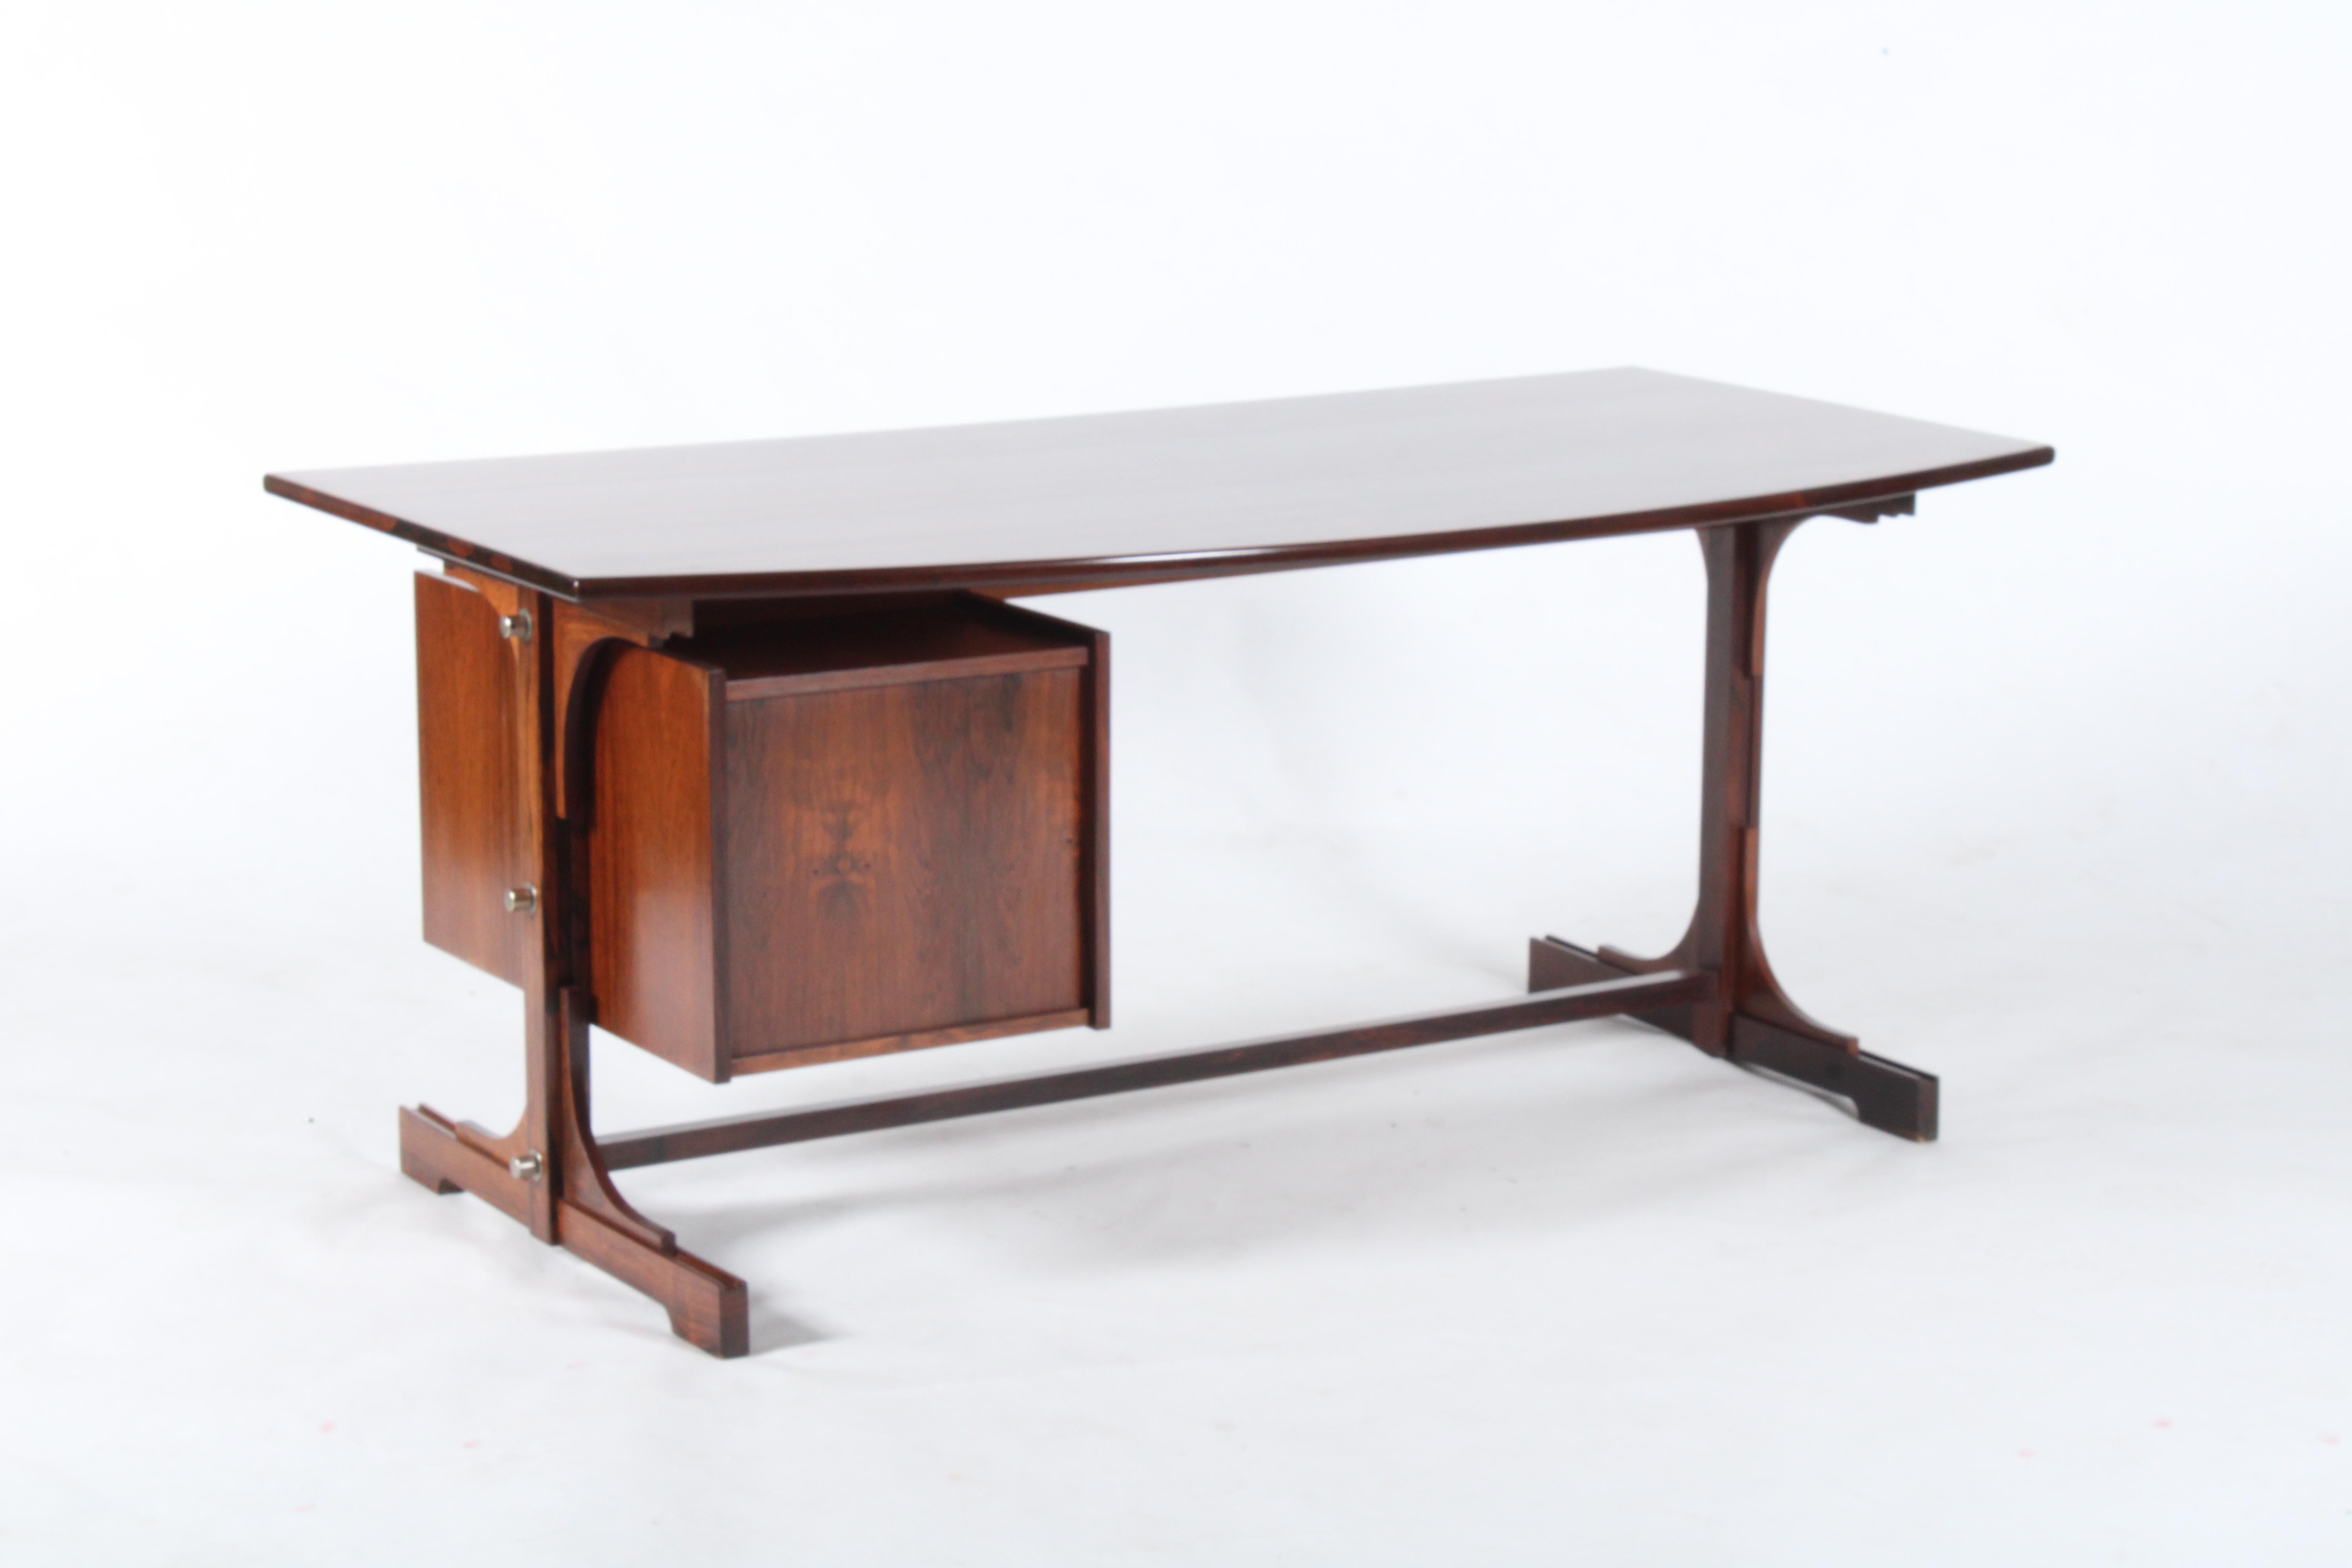 Incredibly beautiful and stylish midcentury Italian desk with curved front featuring they most incredible grain pattern. Manufactured by the renowned Italian Bernini company this exquisite desk has three pull out drawers that provide ample storage